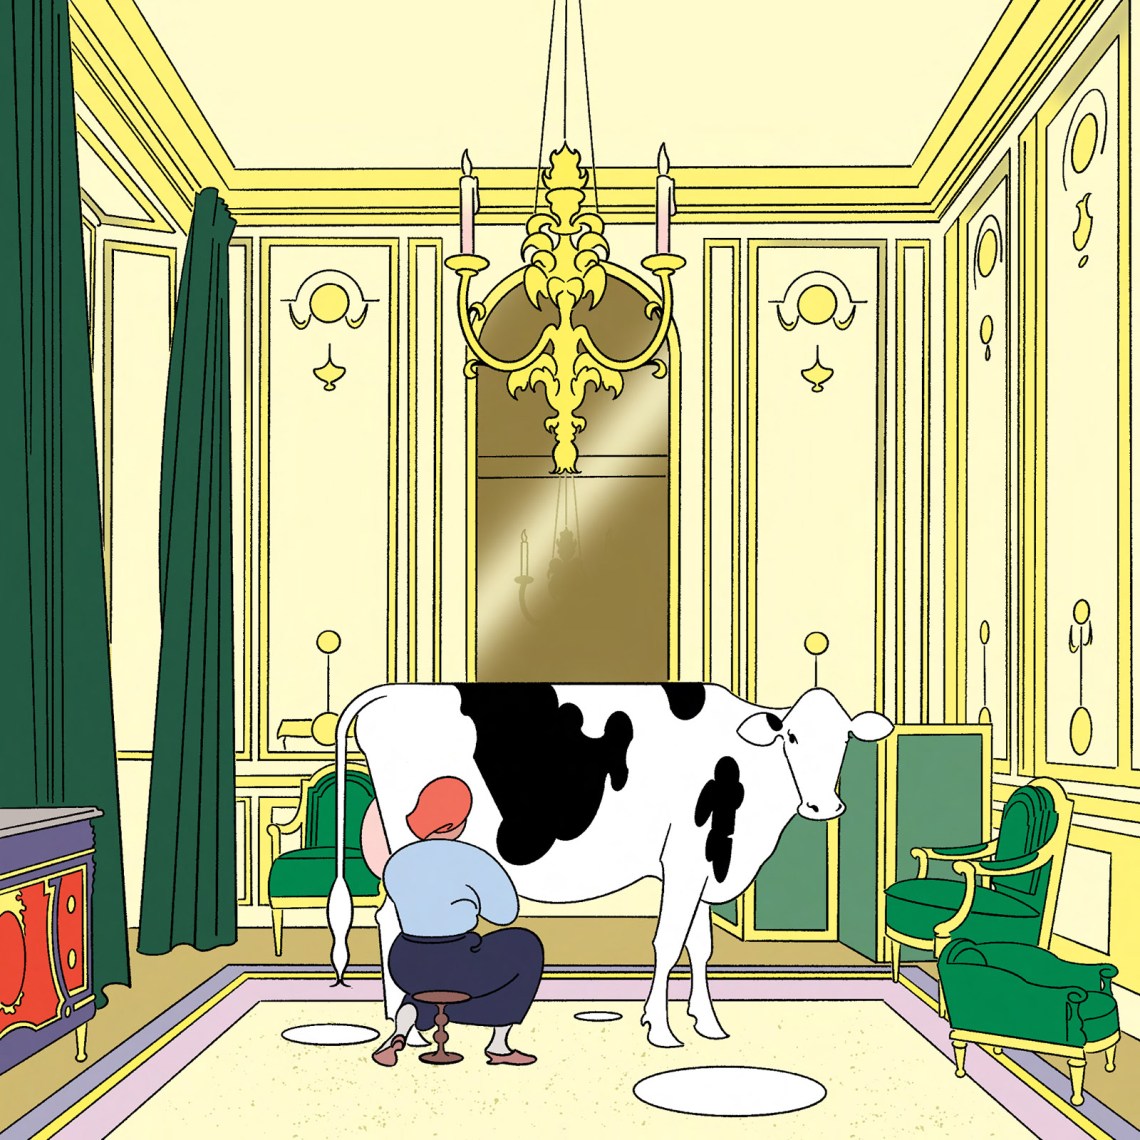 A woman milking a cow in an elegant living room